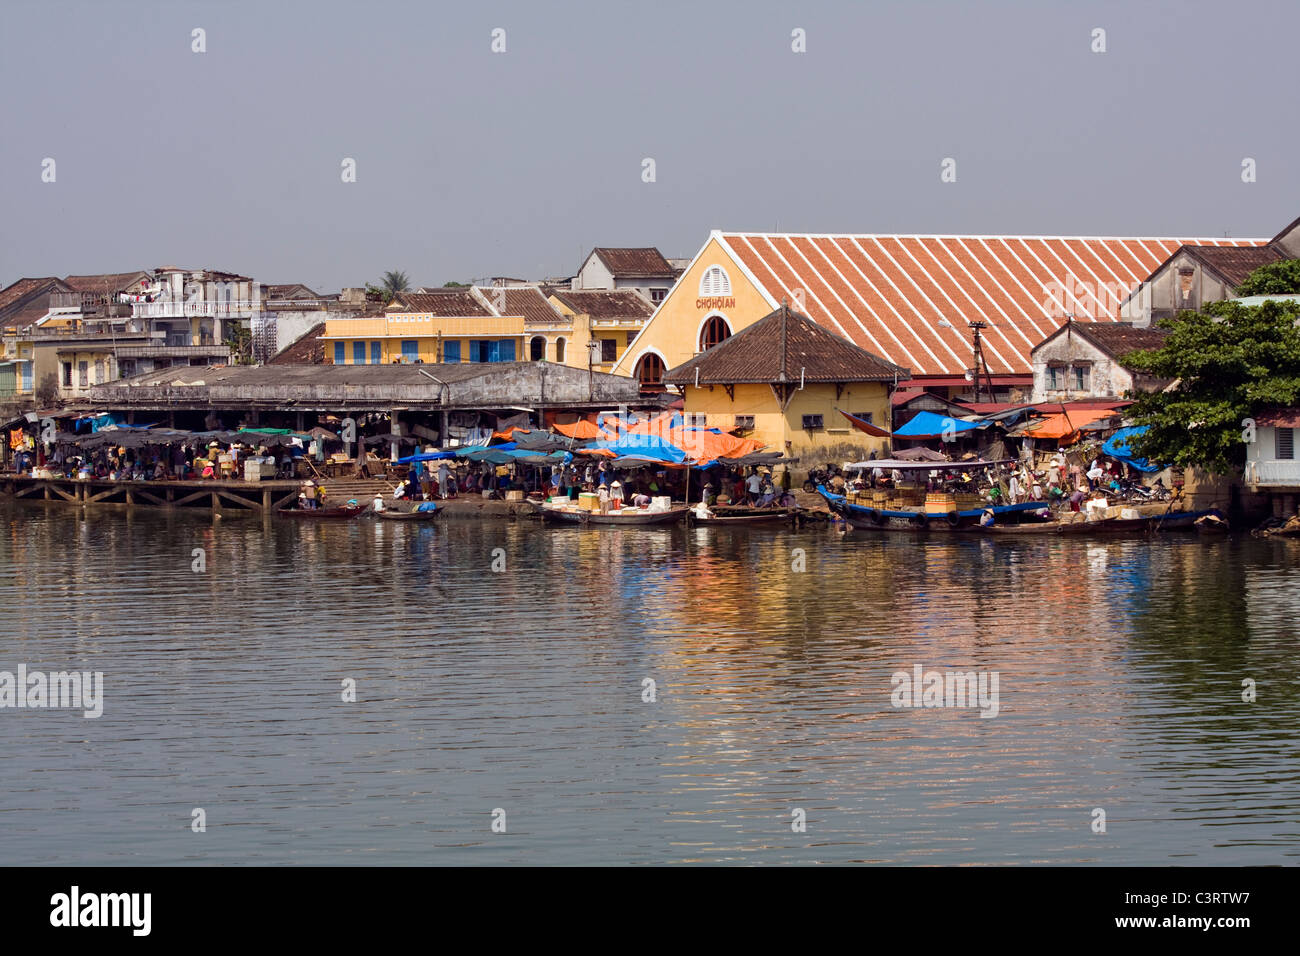 Market by the river, Hoi An, Vietnam Stock Photo